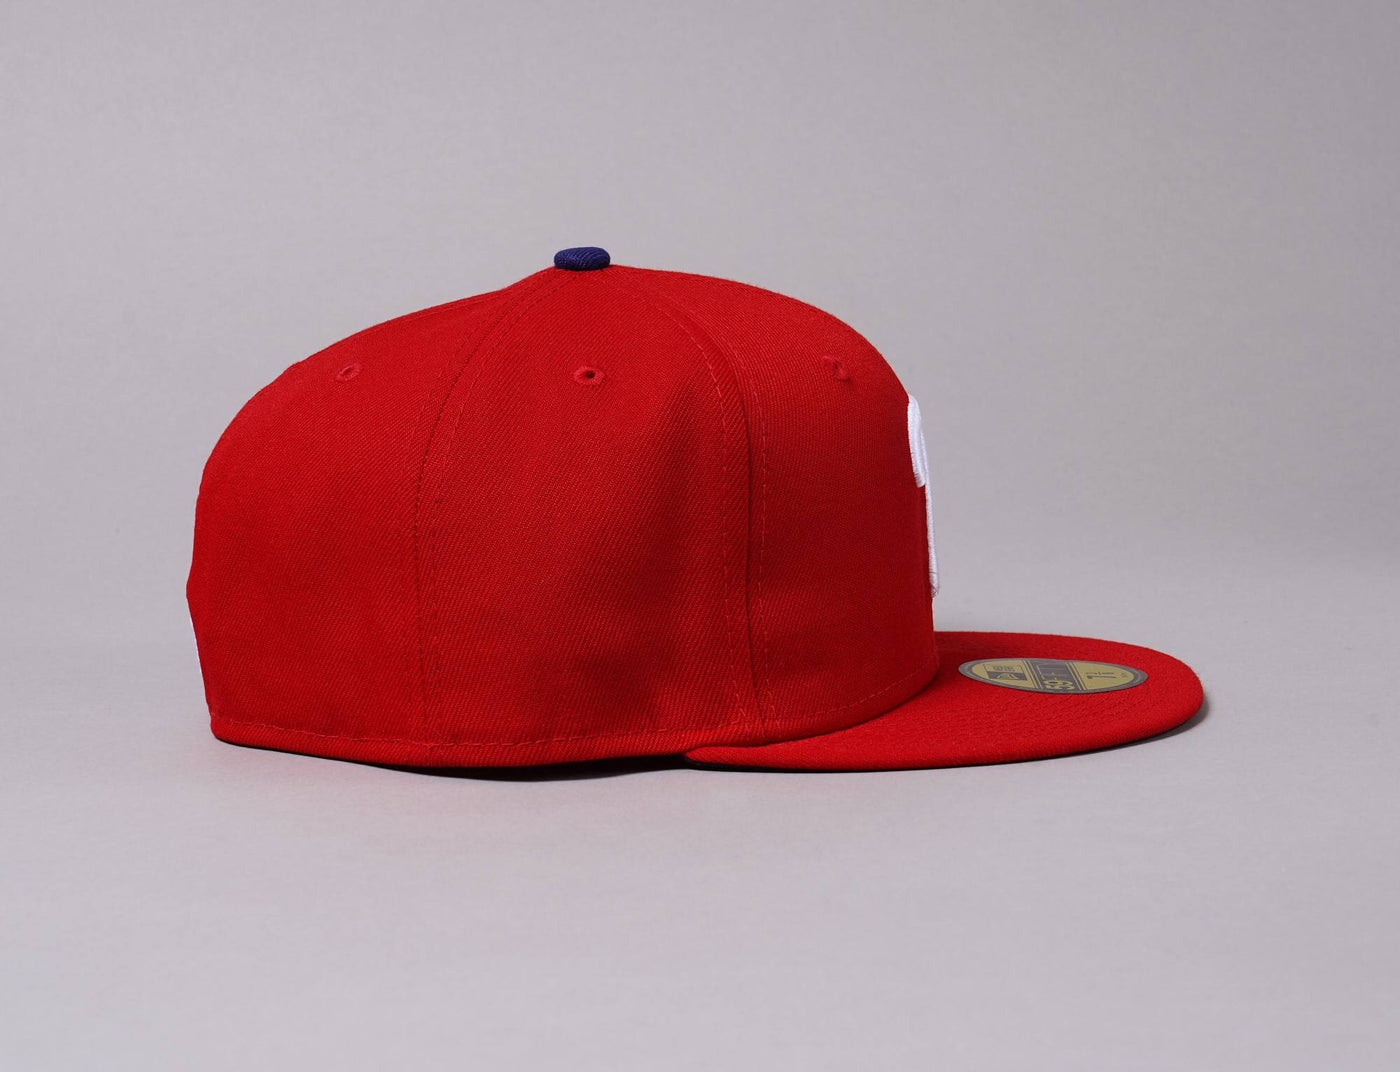 Cap Fitted 59Fifty AC Perf Philadelphia Phillies Game 2021 New Era